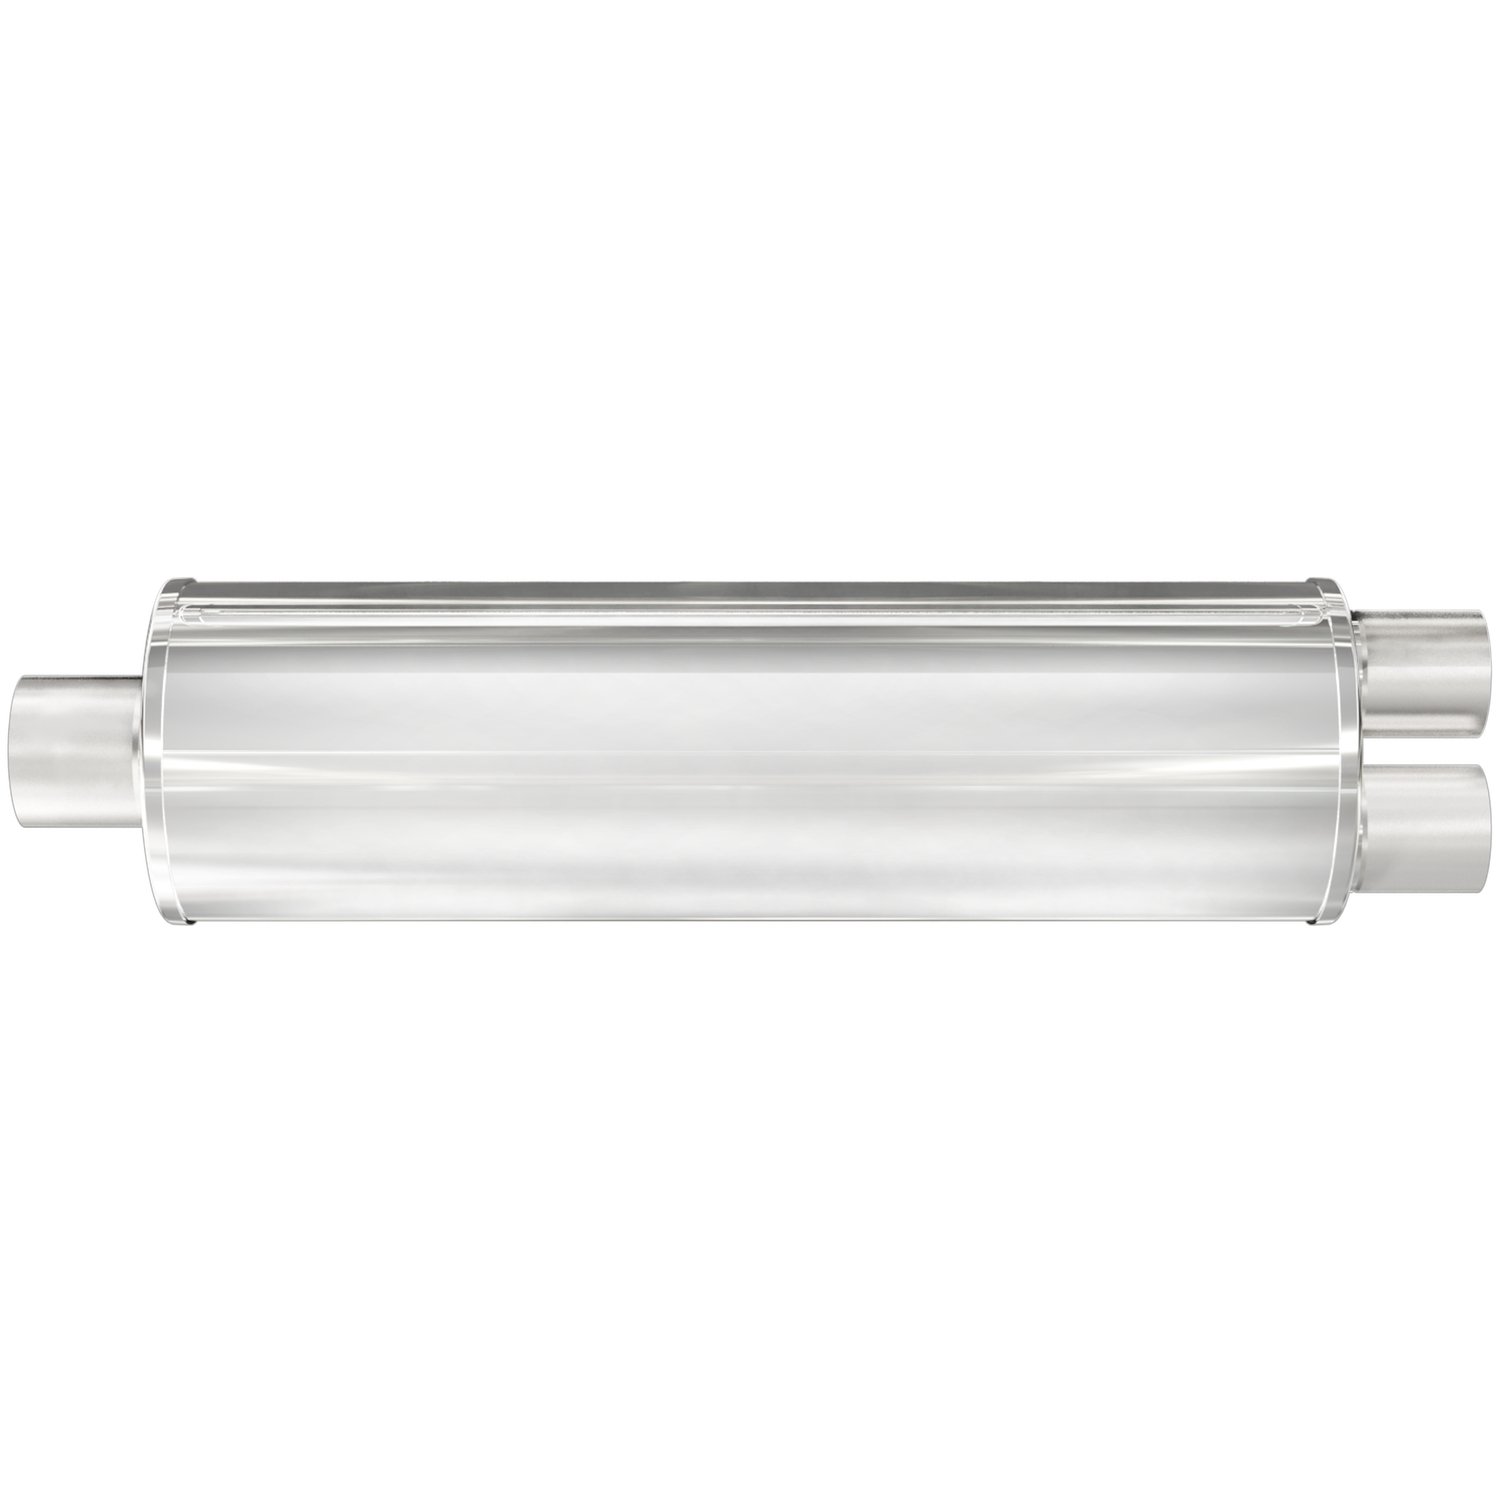 7" Round XL 3-Chamber Muffler Single In/Dual Out: 2.25"/2" Body Length: 24" Overall Length: 30" Satin Finish